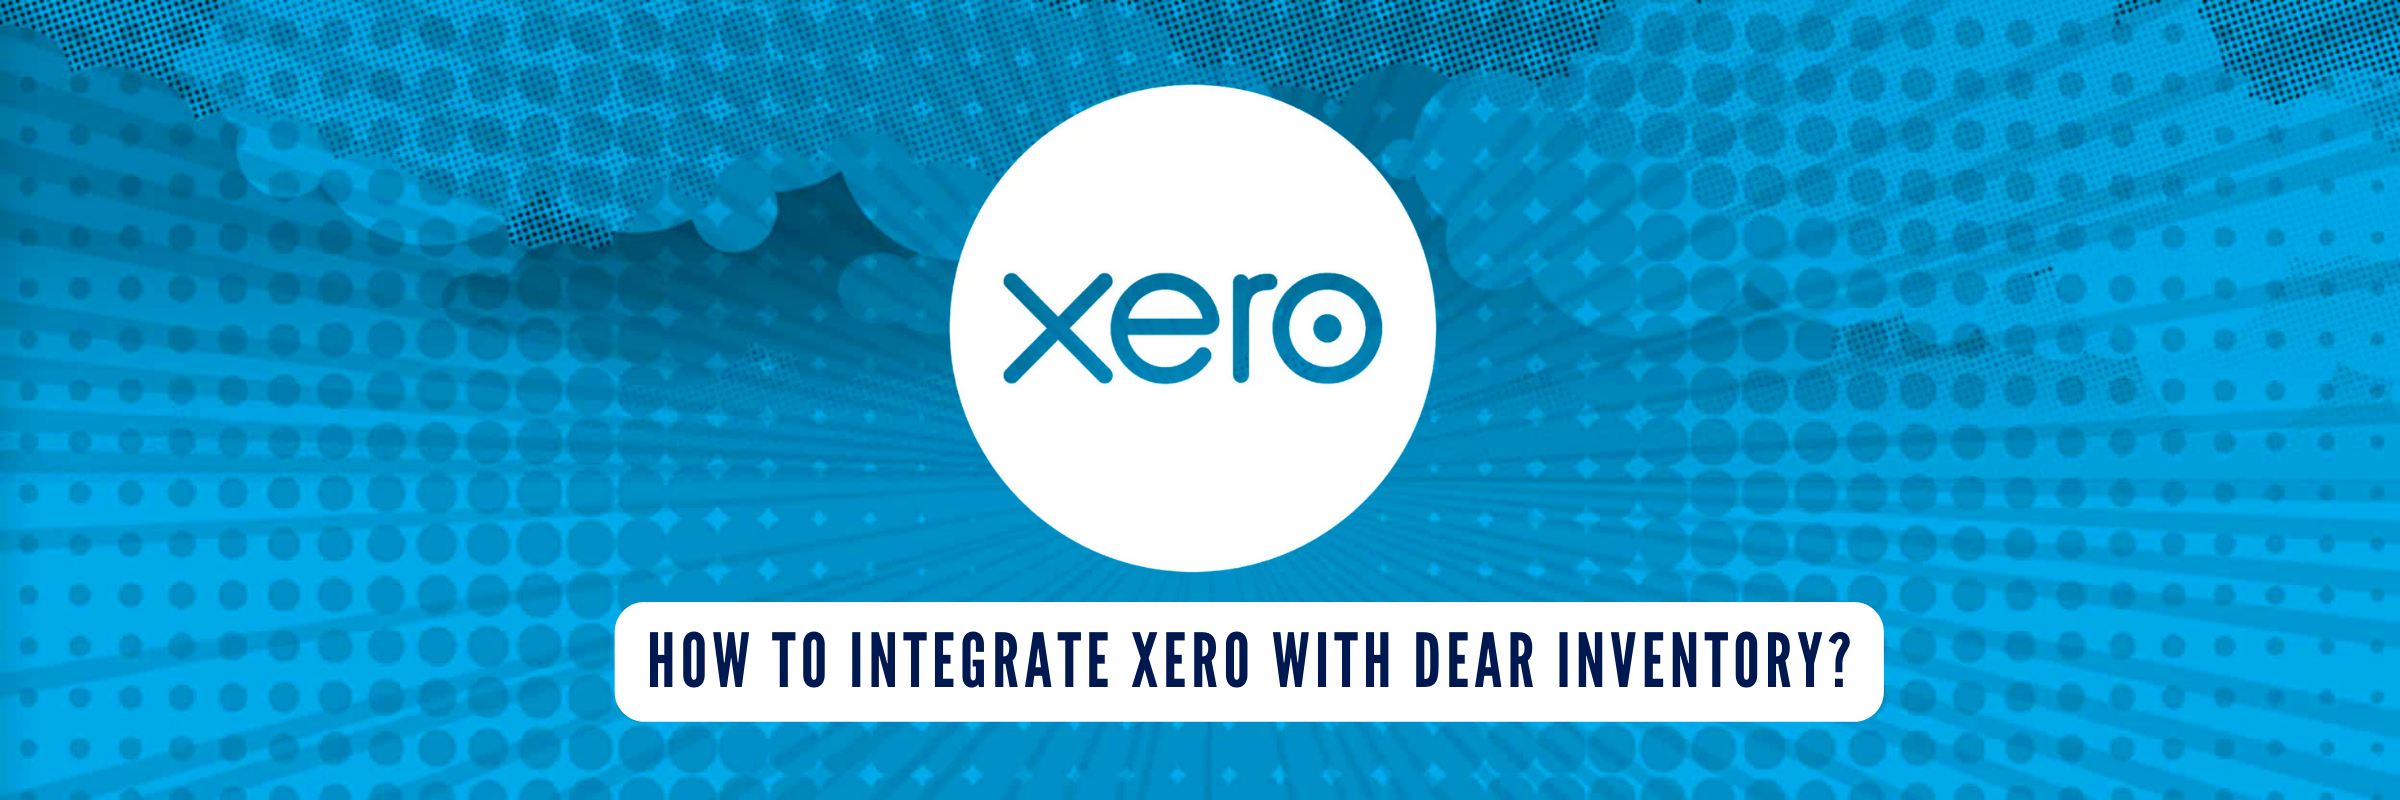 How to integrate Xero with DEAR inventory?